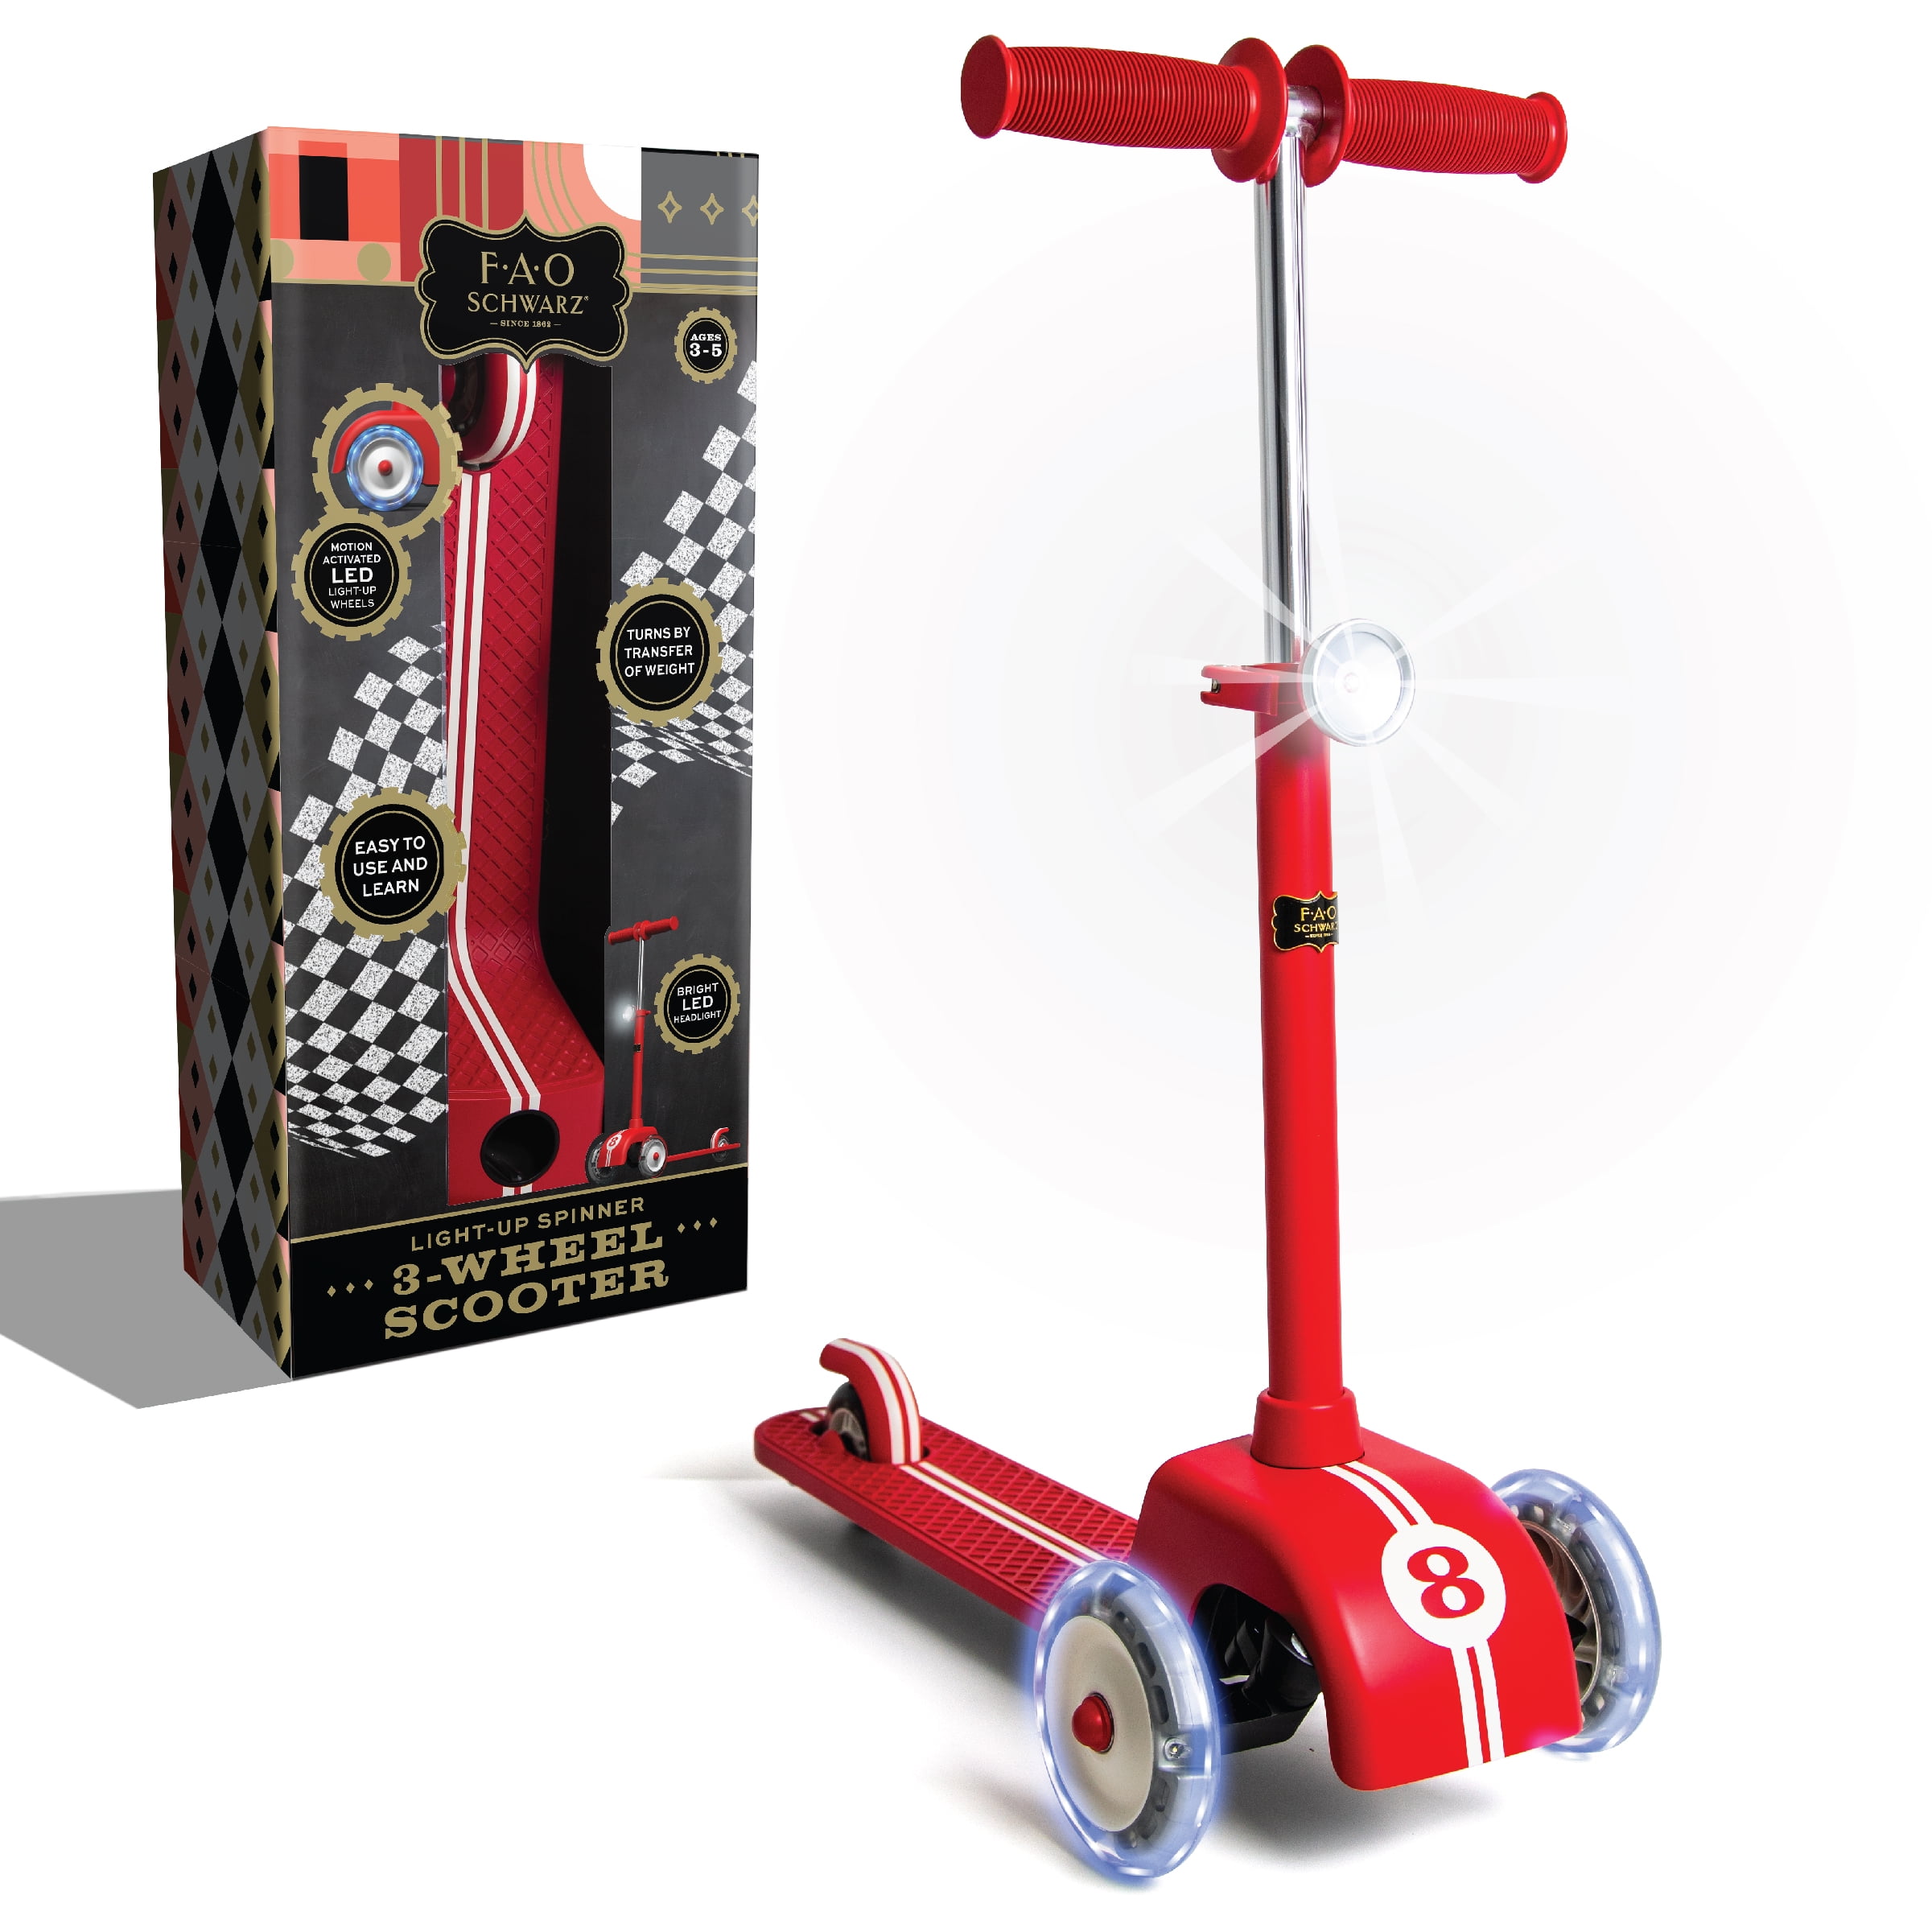 FAO Schwarz Kids LED Light-Up Spinner 3-Wheel Scooter Red White Striped  Kickstart Razor with Adjustable Height Fun Activity for Outdoor Day/Night  Play